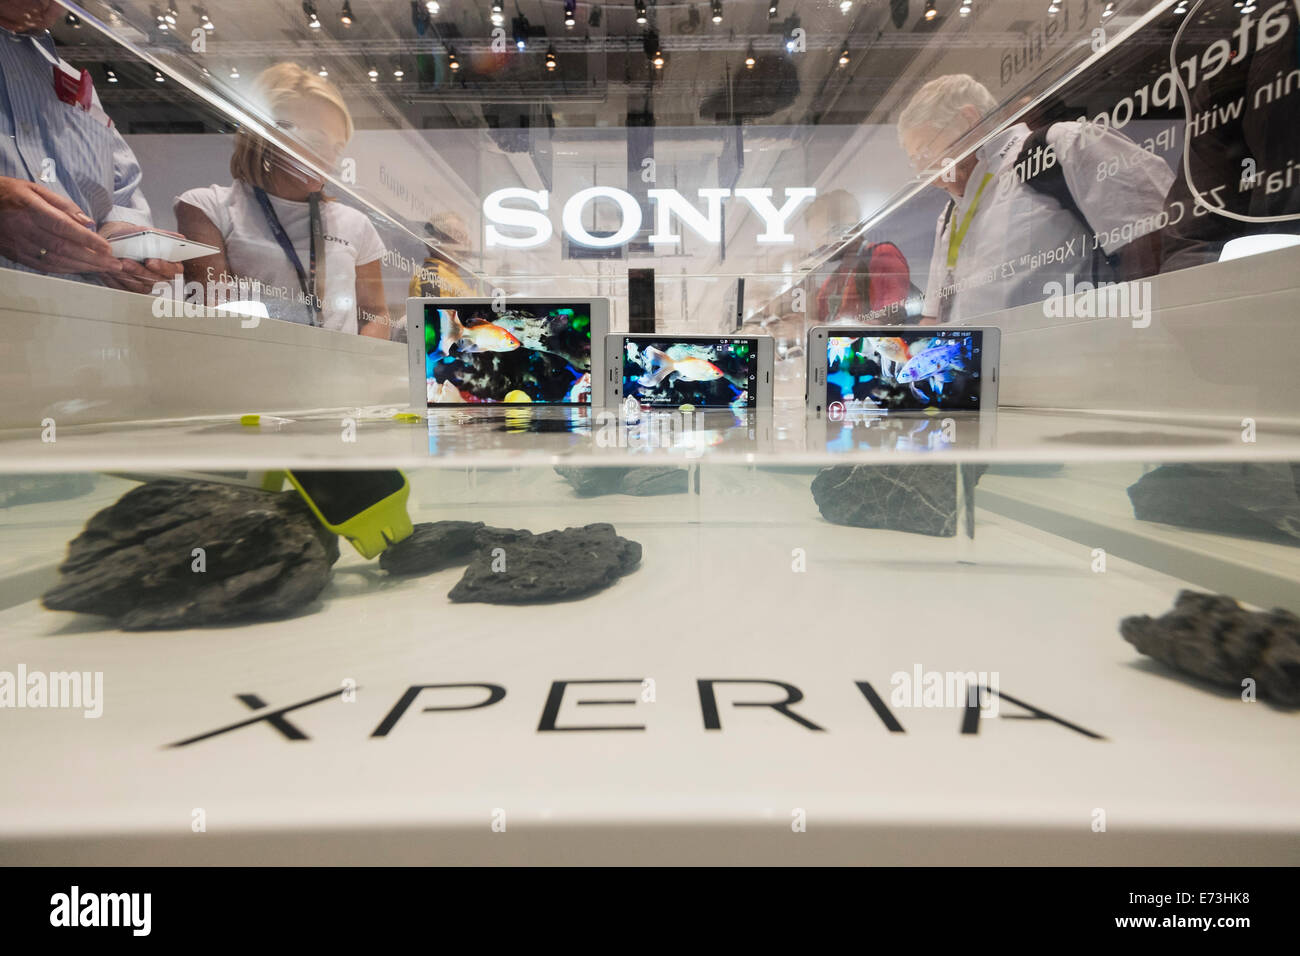 Berlin, Germany. 5th September, 2014. Water tank display of waterproof Sony Xperia tablets and watches at IFA 2014 consumer electronics show in Berlin Germany Credit:  Iain Masterton/Alamy Live News Stock Photo